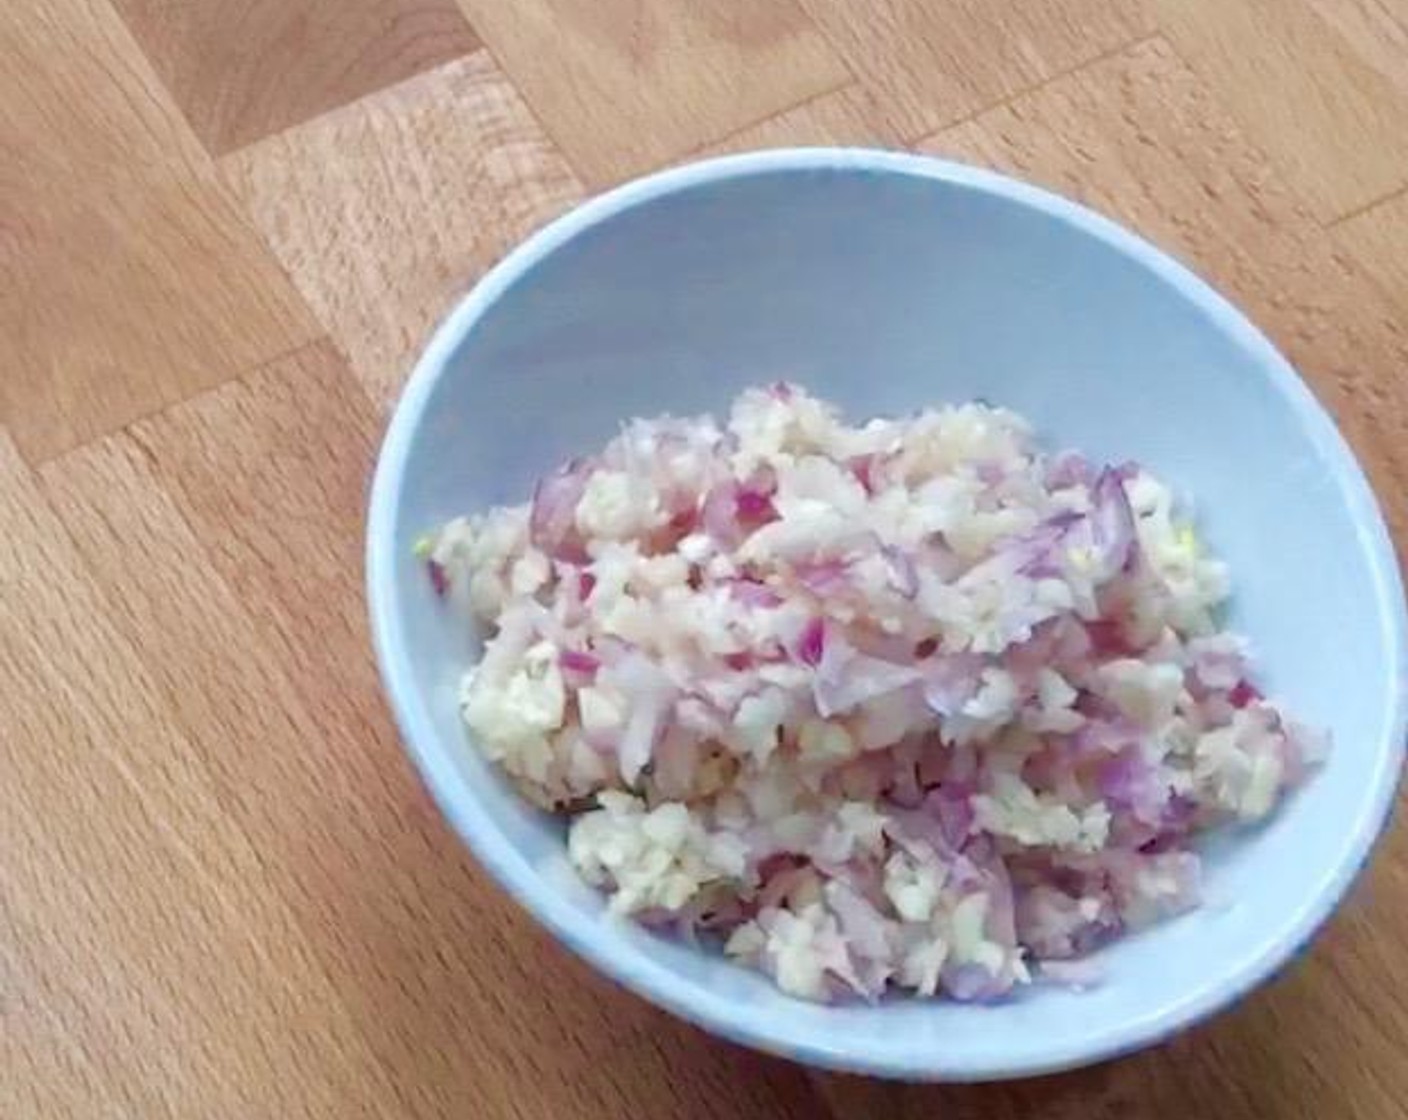 step 2 Next, peel and chop Garlic (50 cloves) and Shallot (1/3 cup).